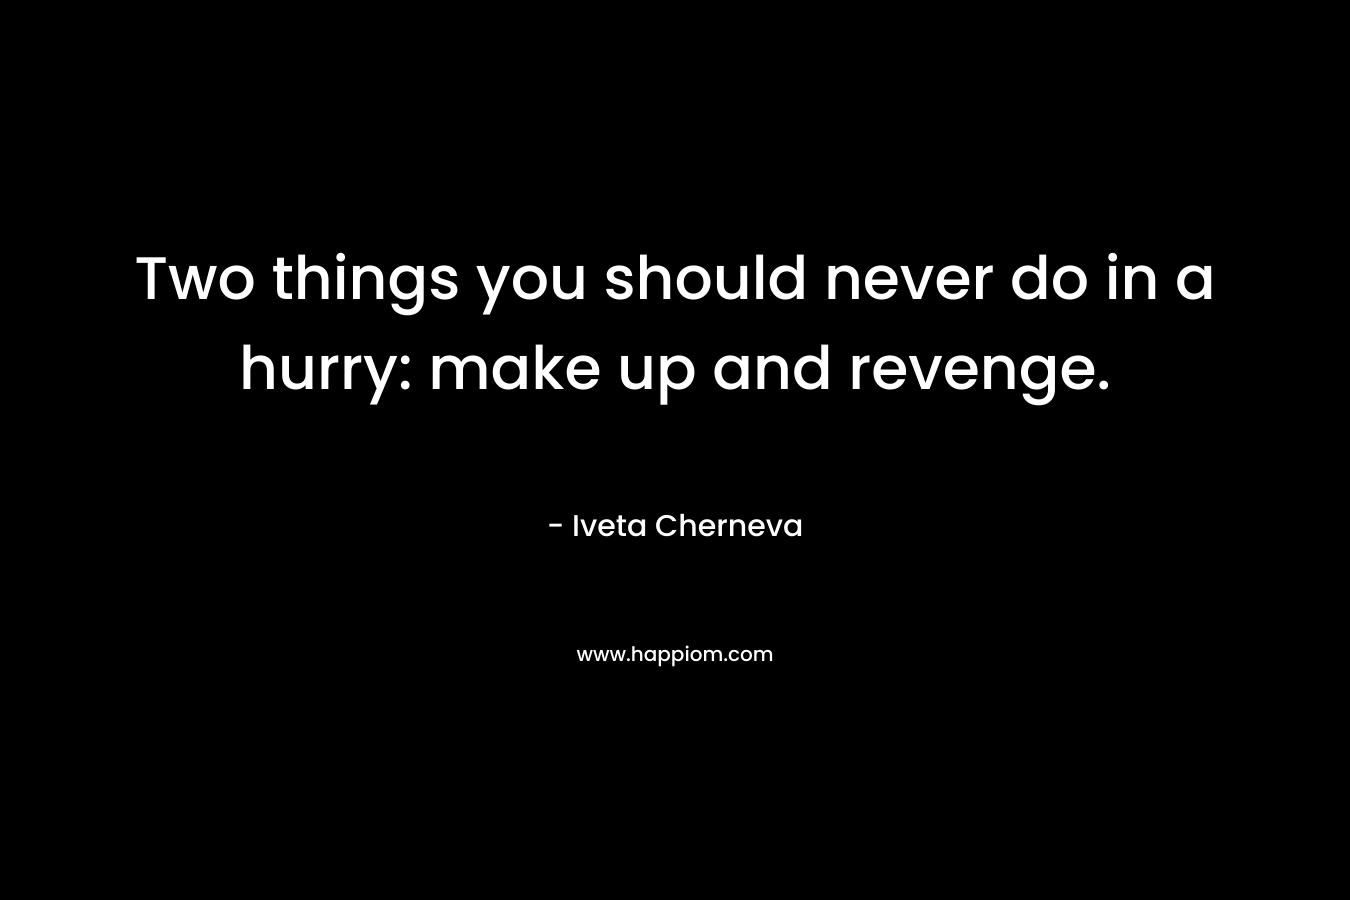 Two things you should never do in a hurry: make up and revenge. – Iveta Cherneva